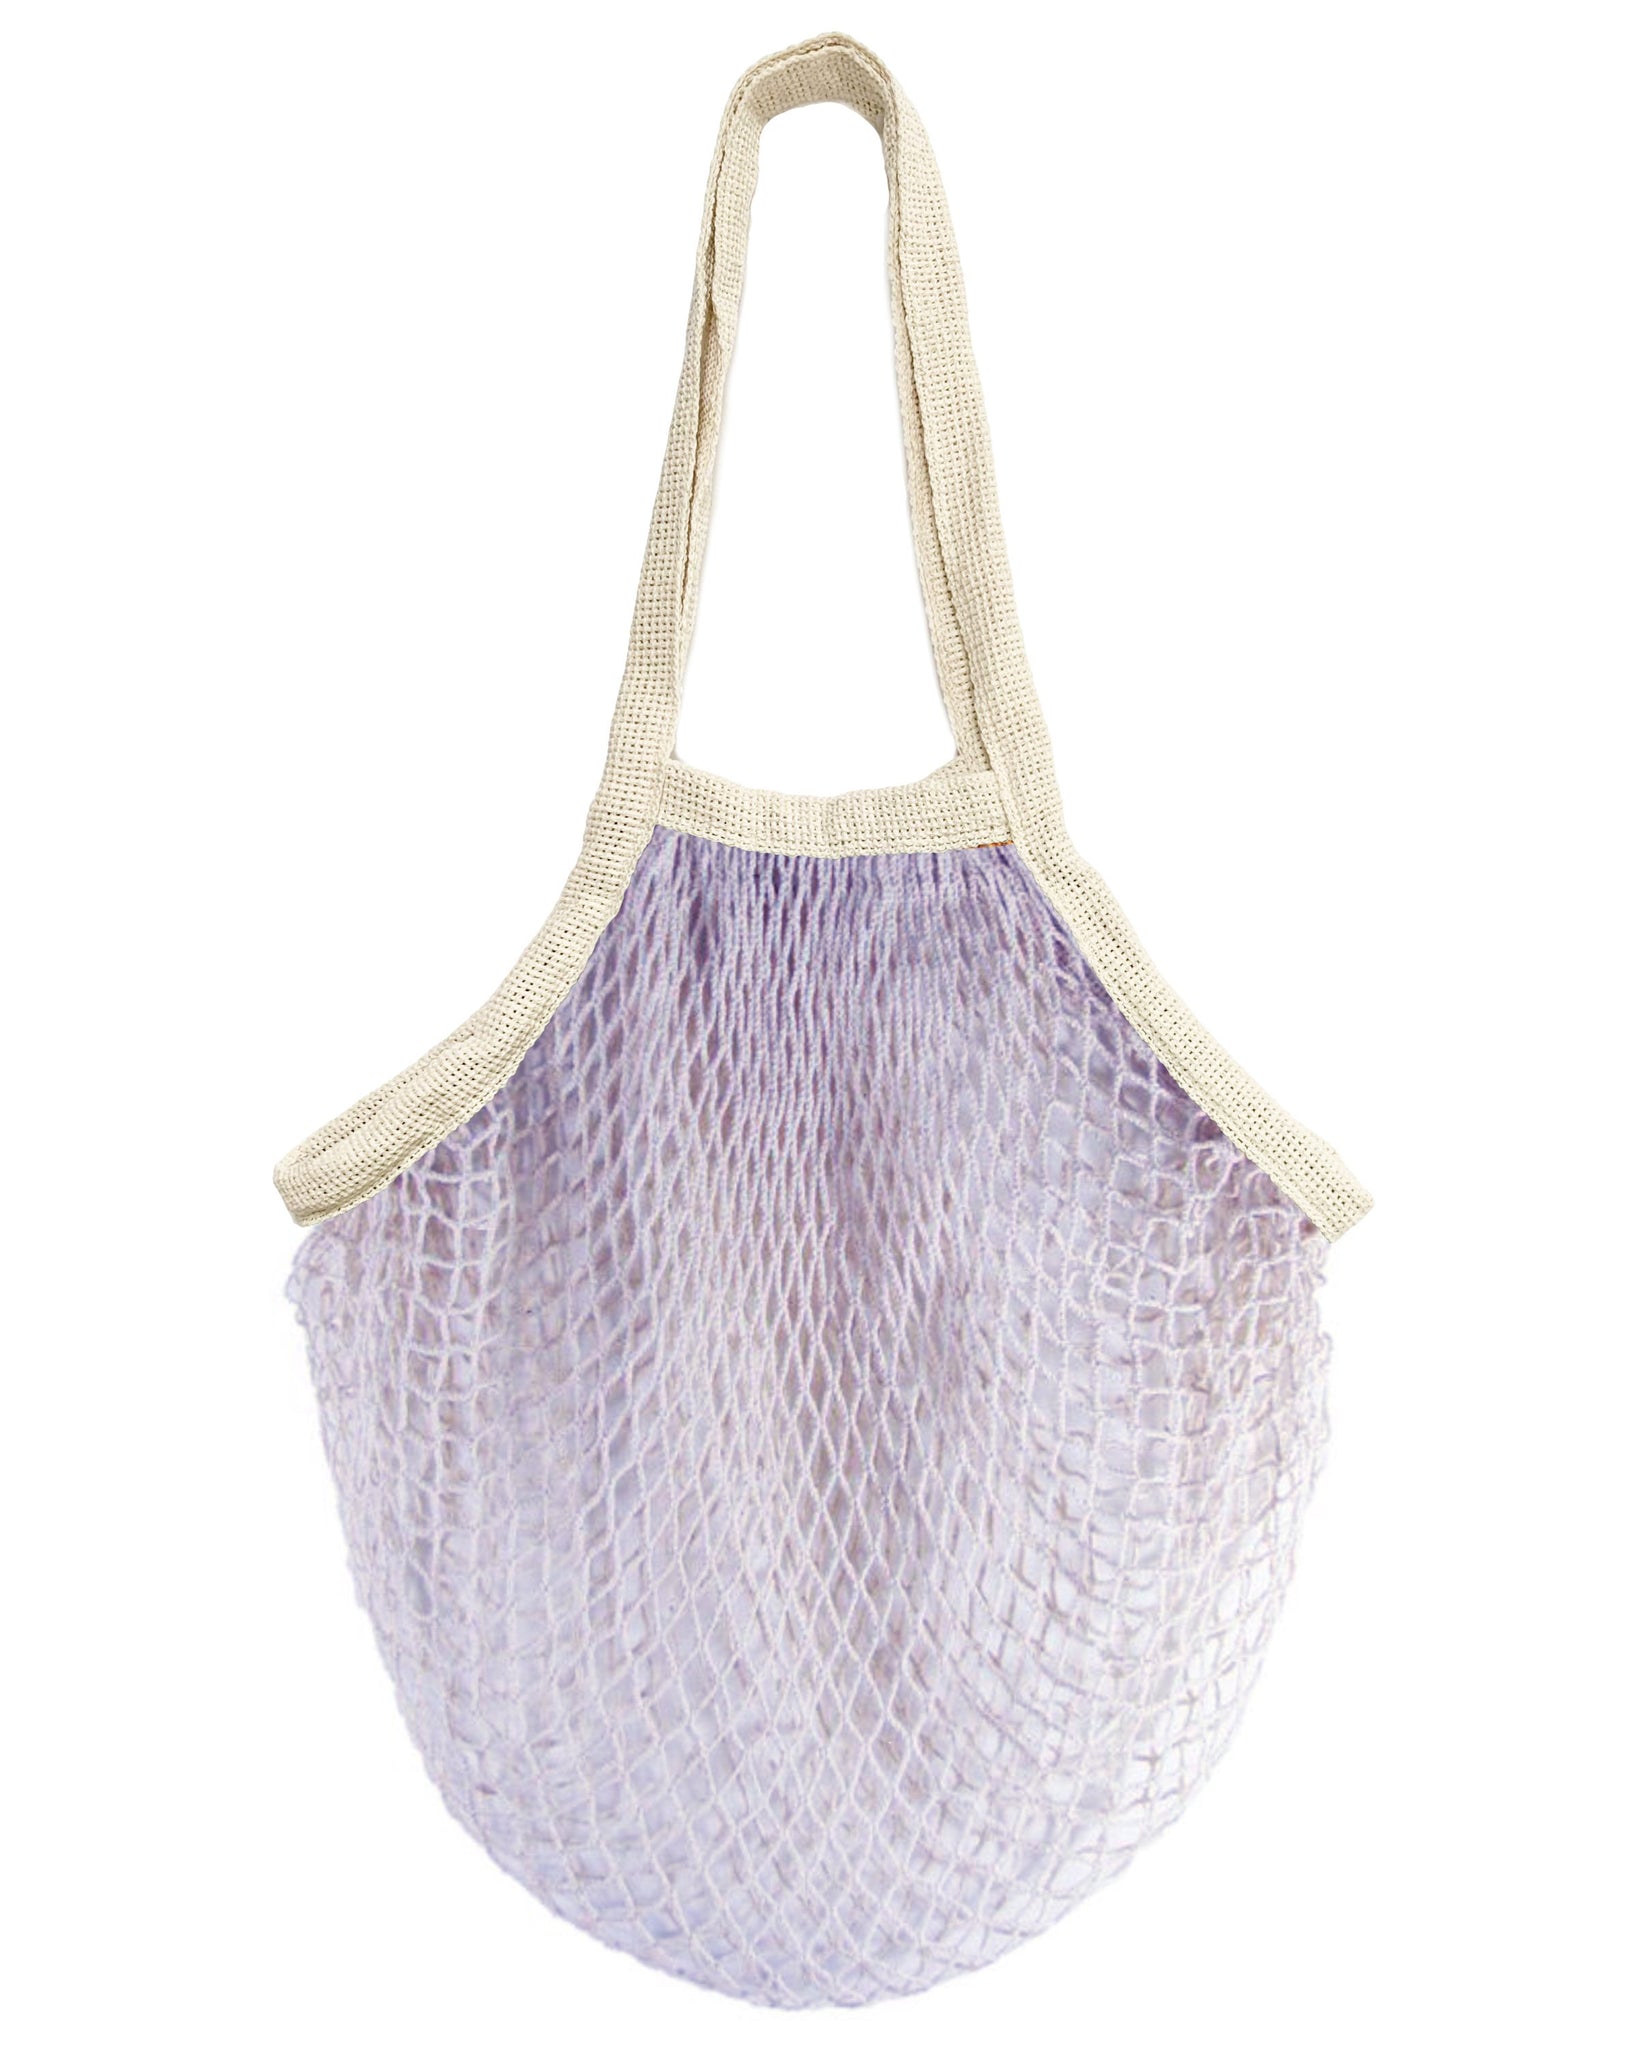 The French Mesh Bag